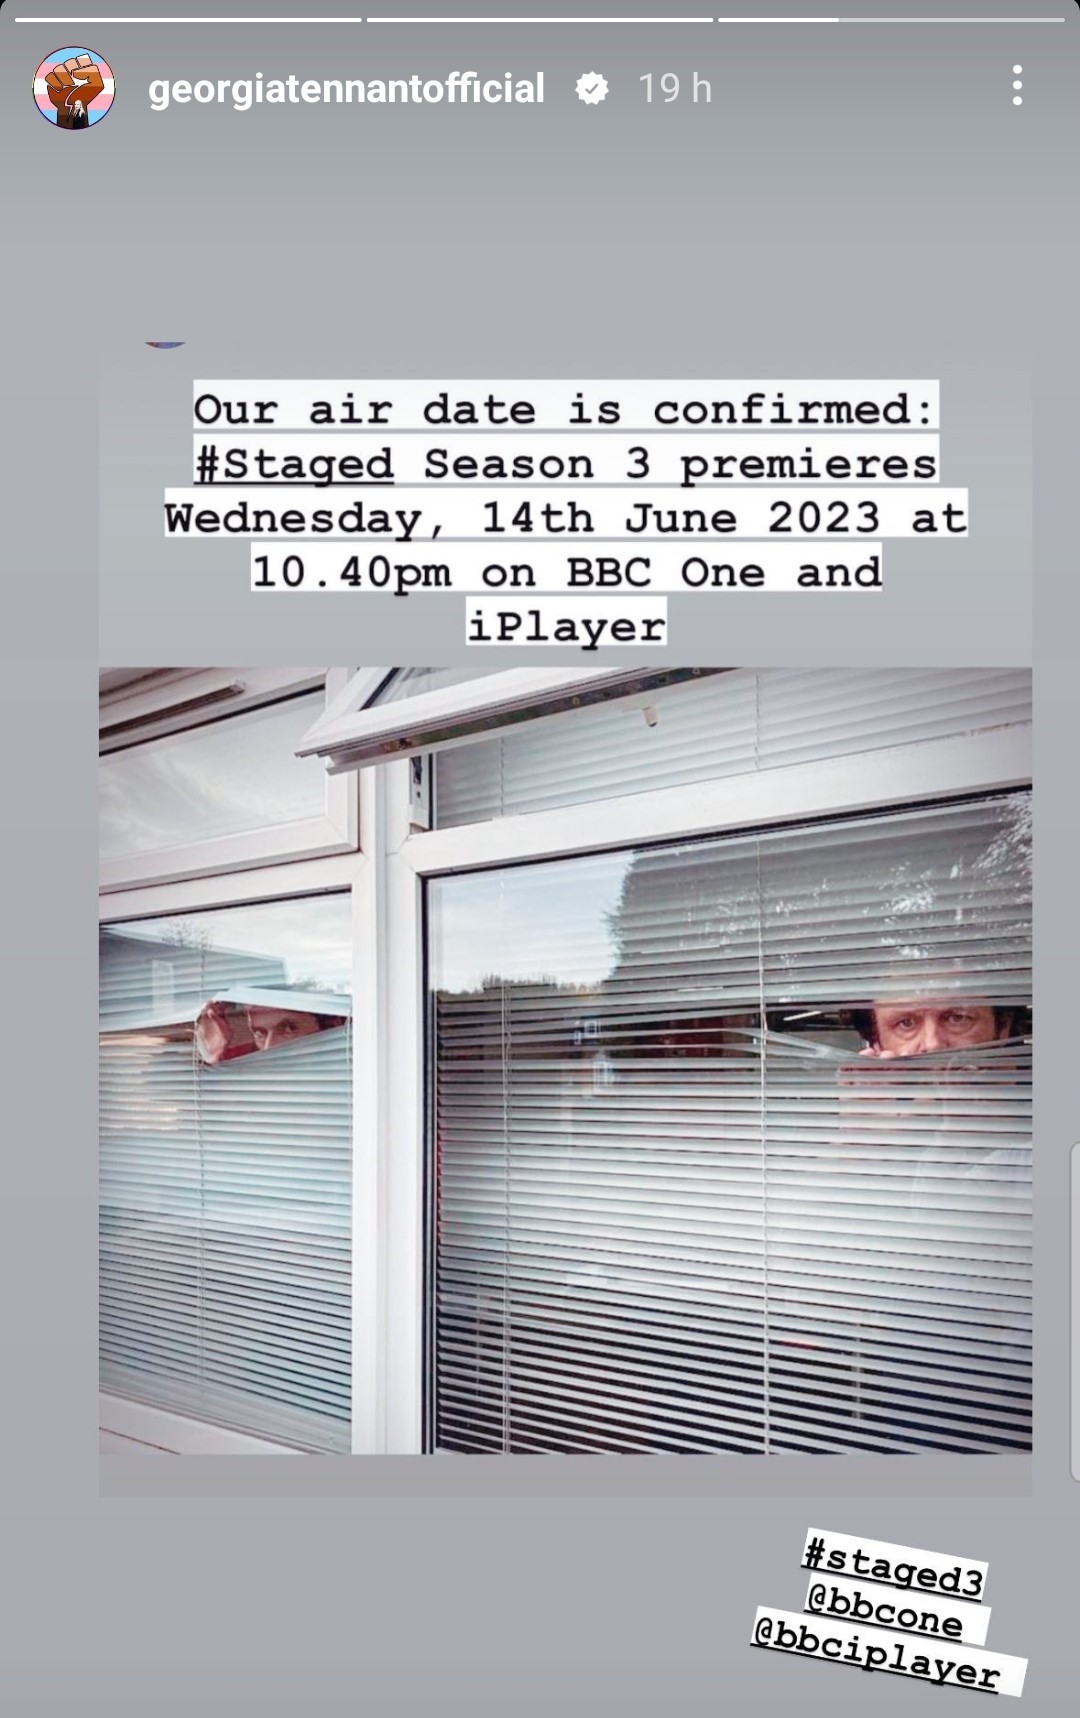 Staged season 3 date announcement from Georgia Tennant's Instagram